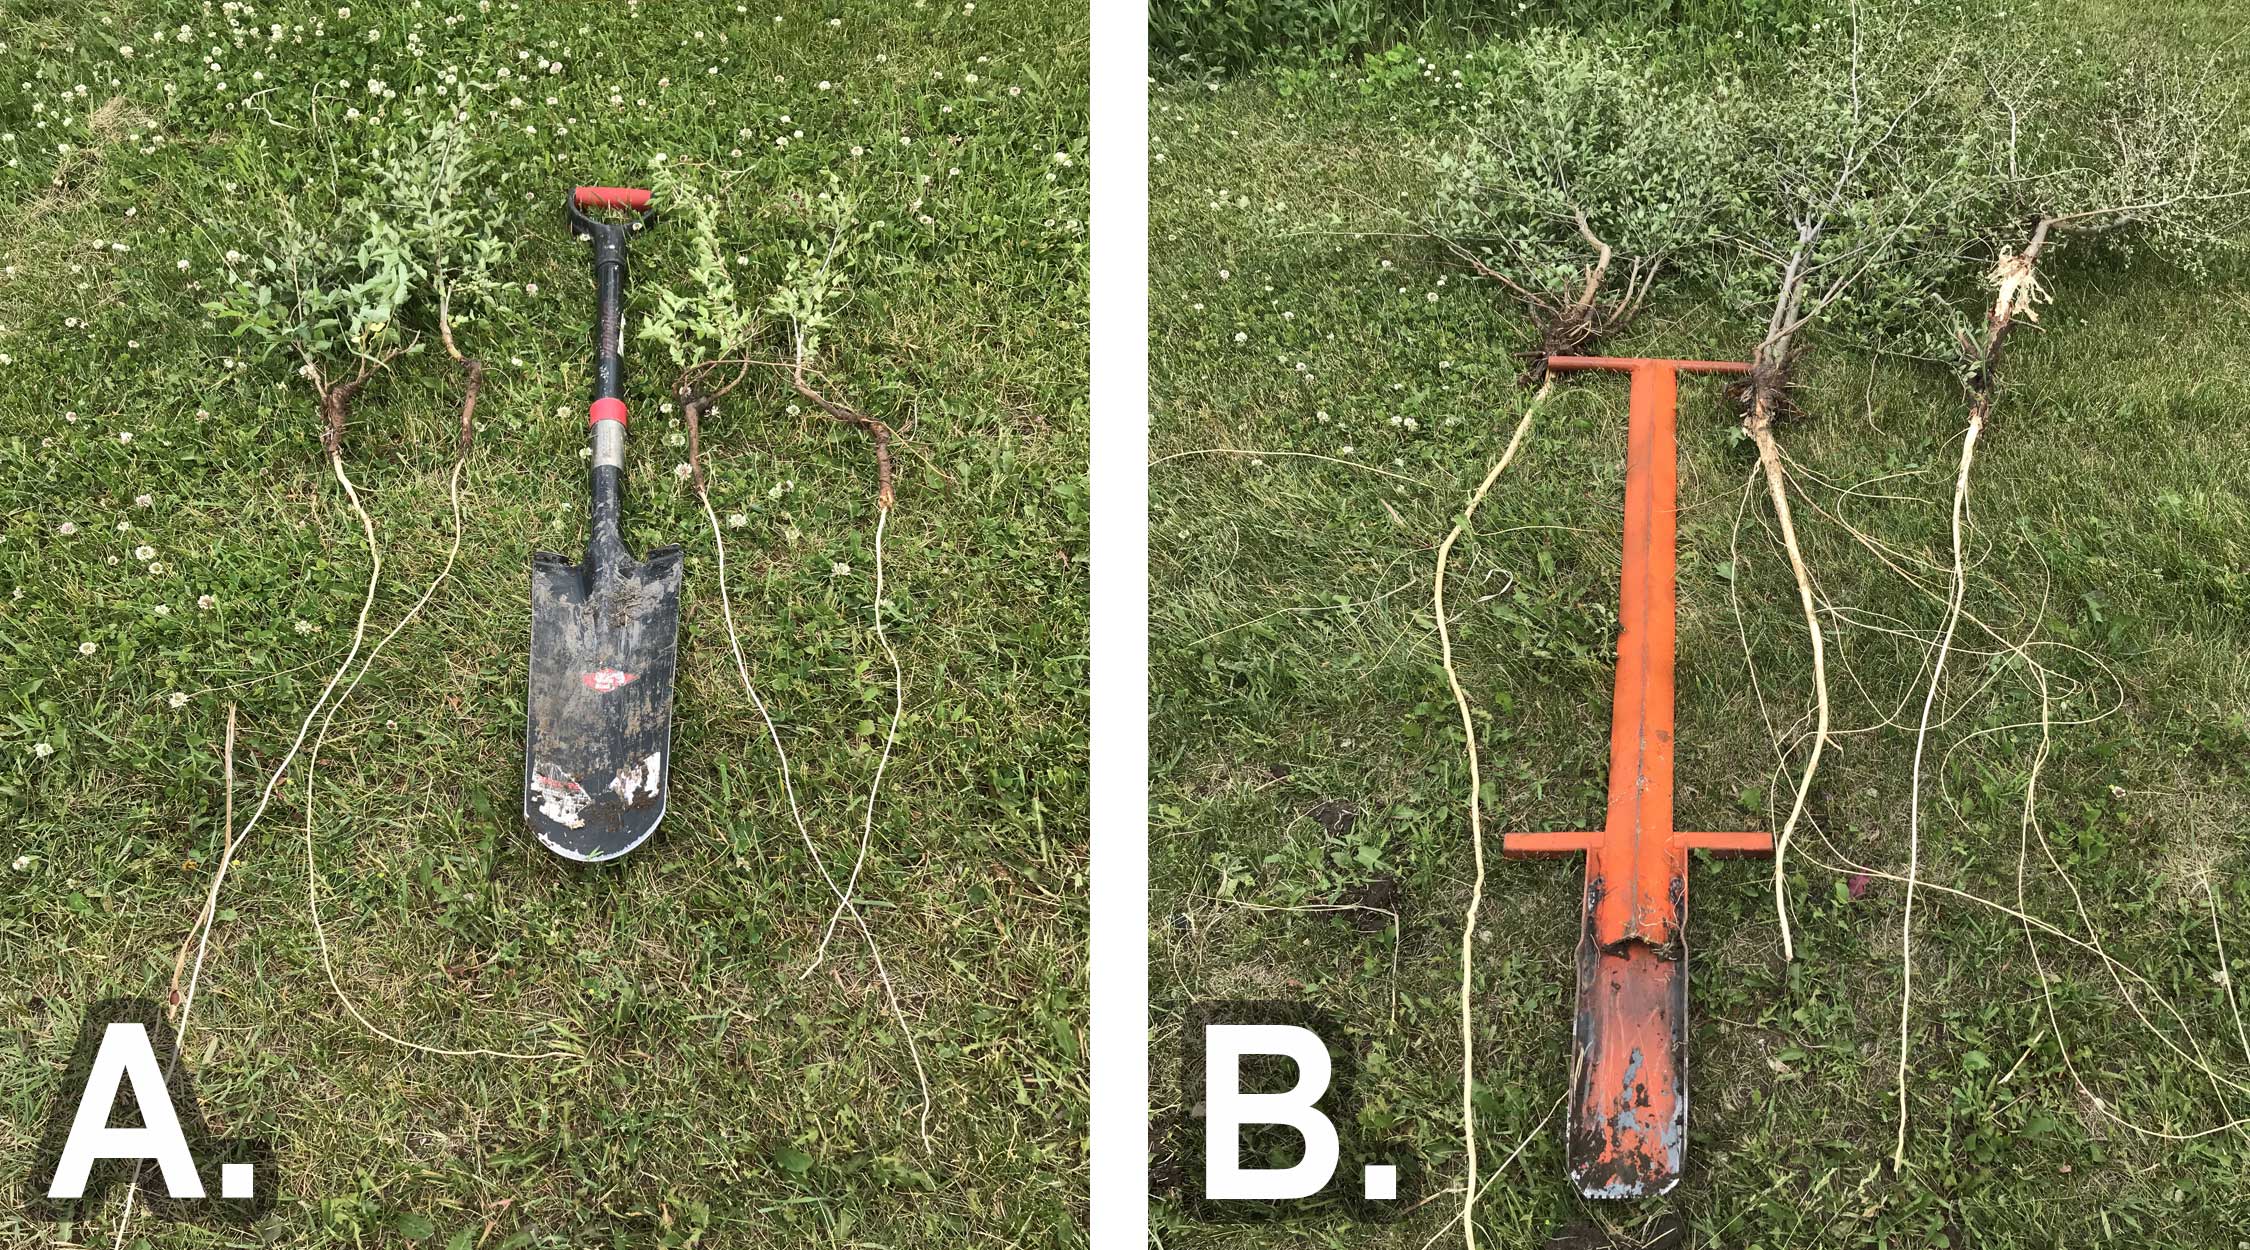 Left: Figure 3-A. Uprooted sapplings next to shovel. The sapplings range 12 to 18 inches in height. Right: Figure 3-B. Several sapplings next to a large, orange removal tool. The sapplings are two to three feet tall.